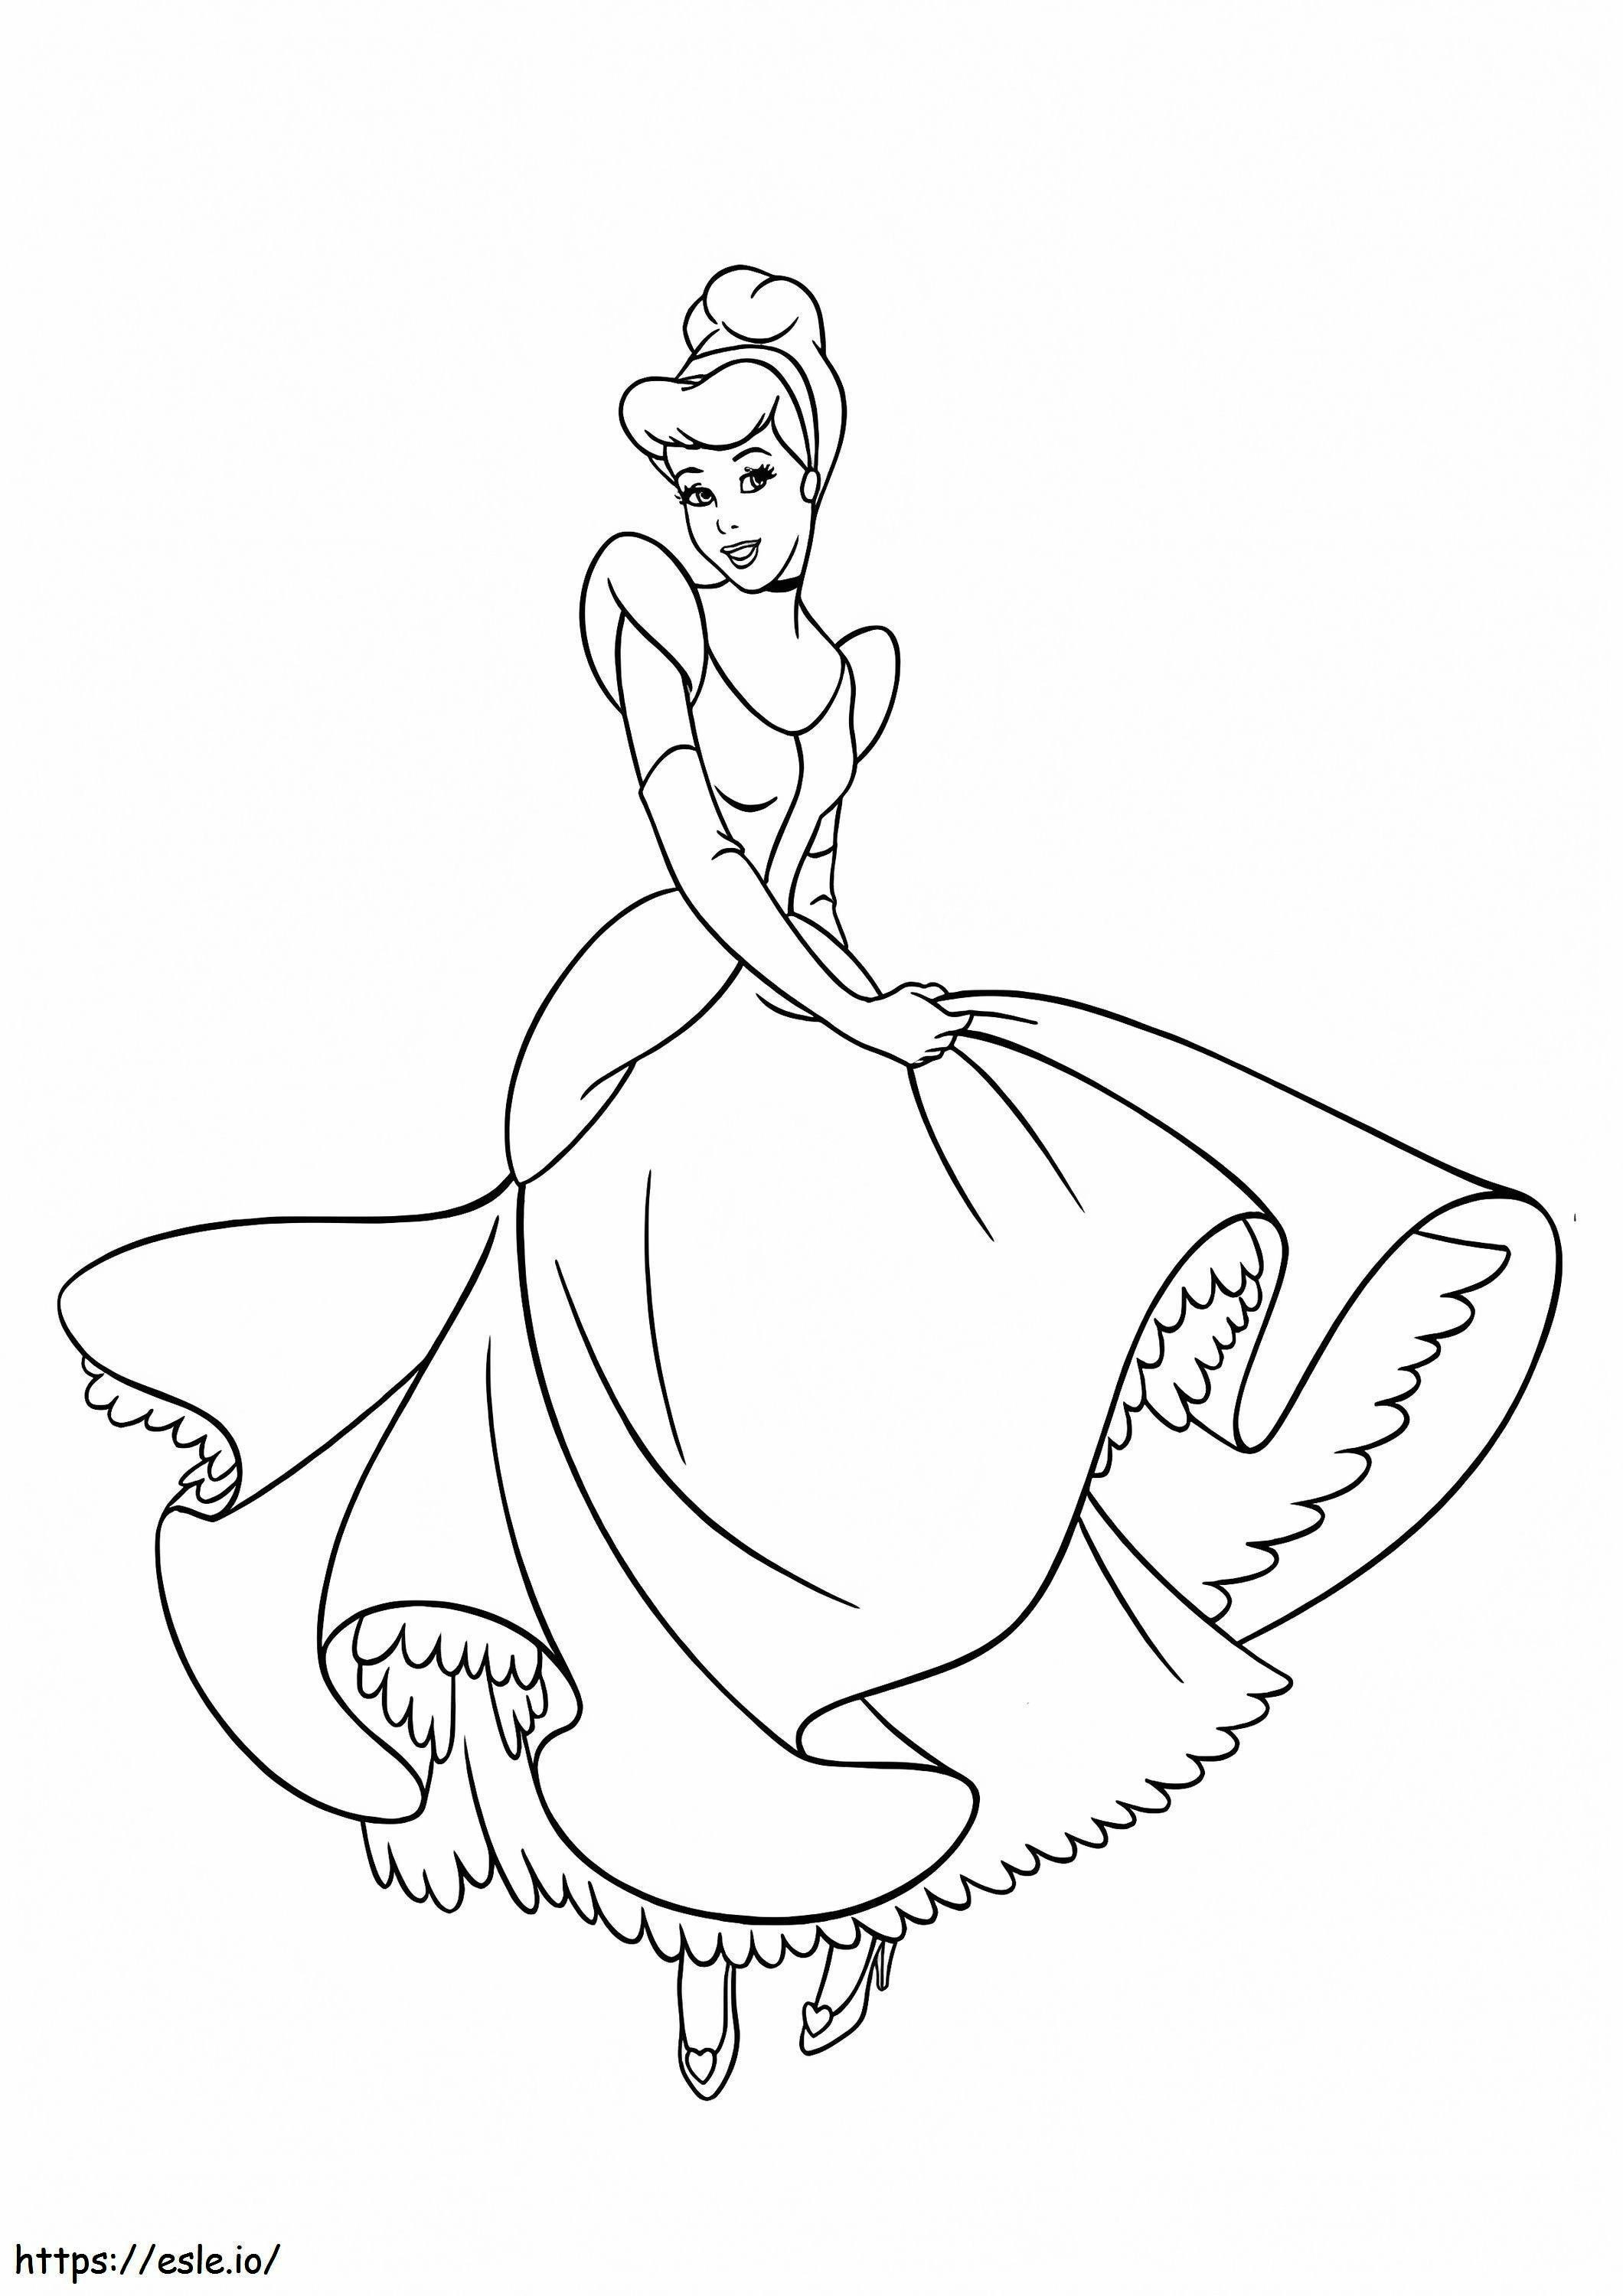 1528340029 The Cinderella With Her Gown A4 coloring page